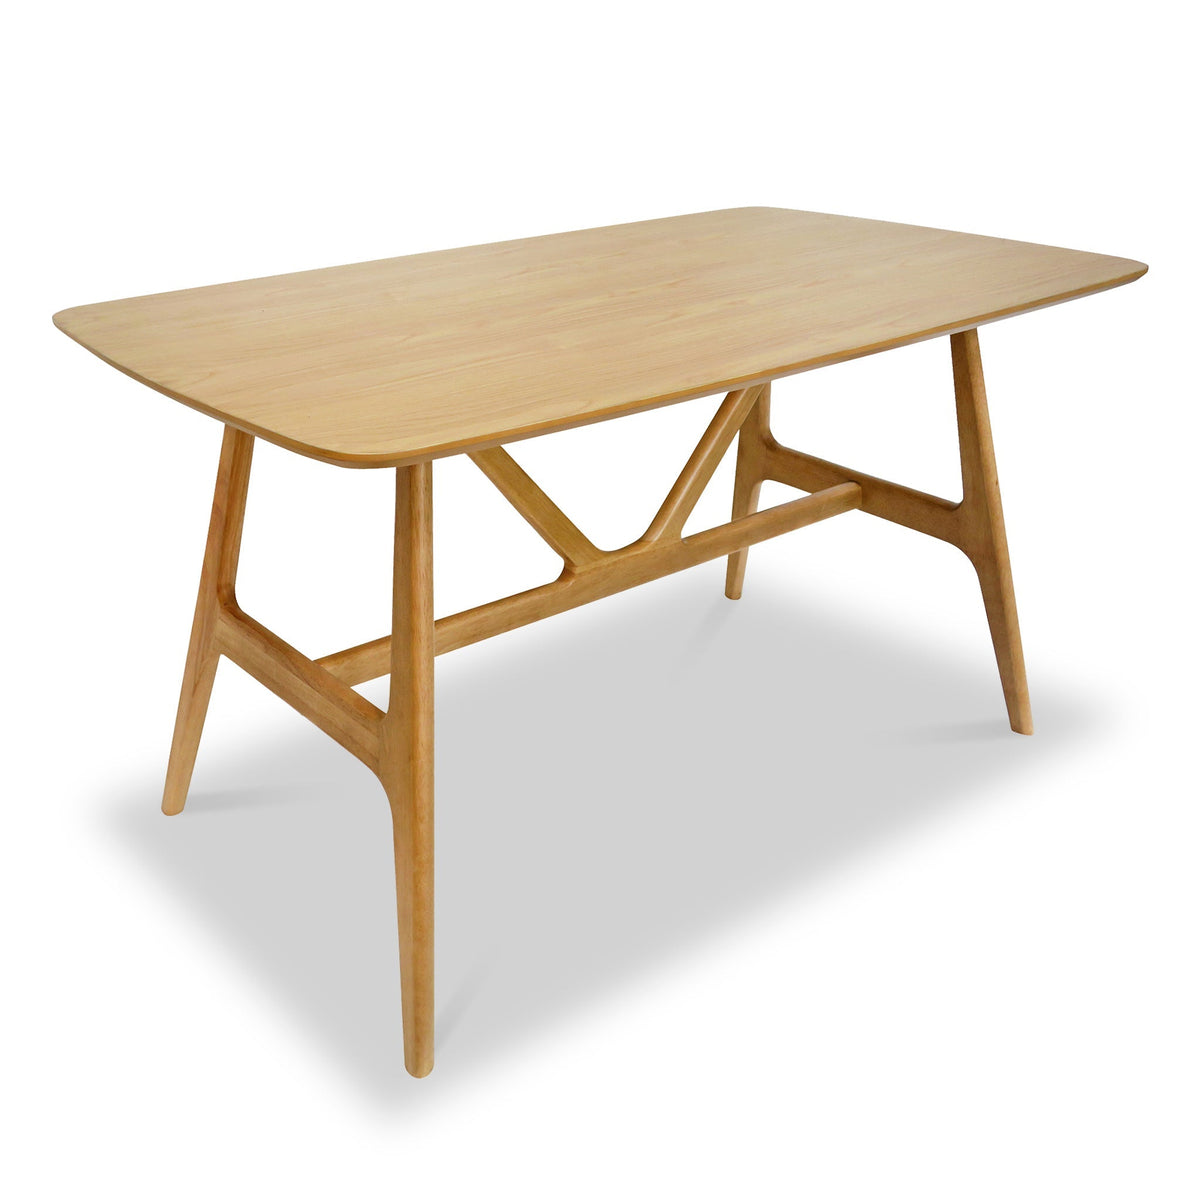 Ronnie Oak Rectangular Dining Table from Roseland Furniture